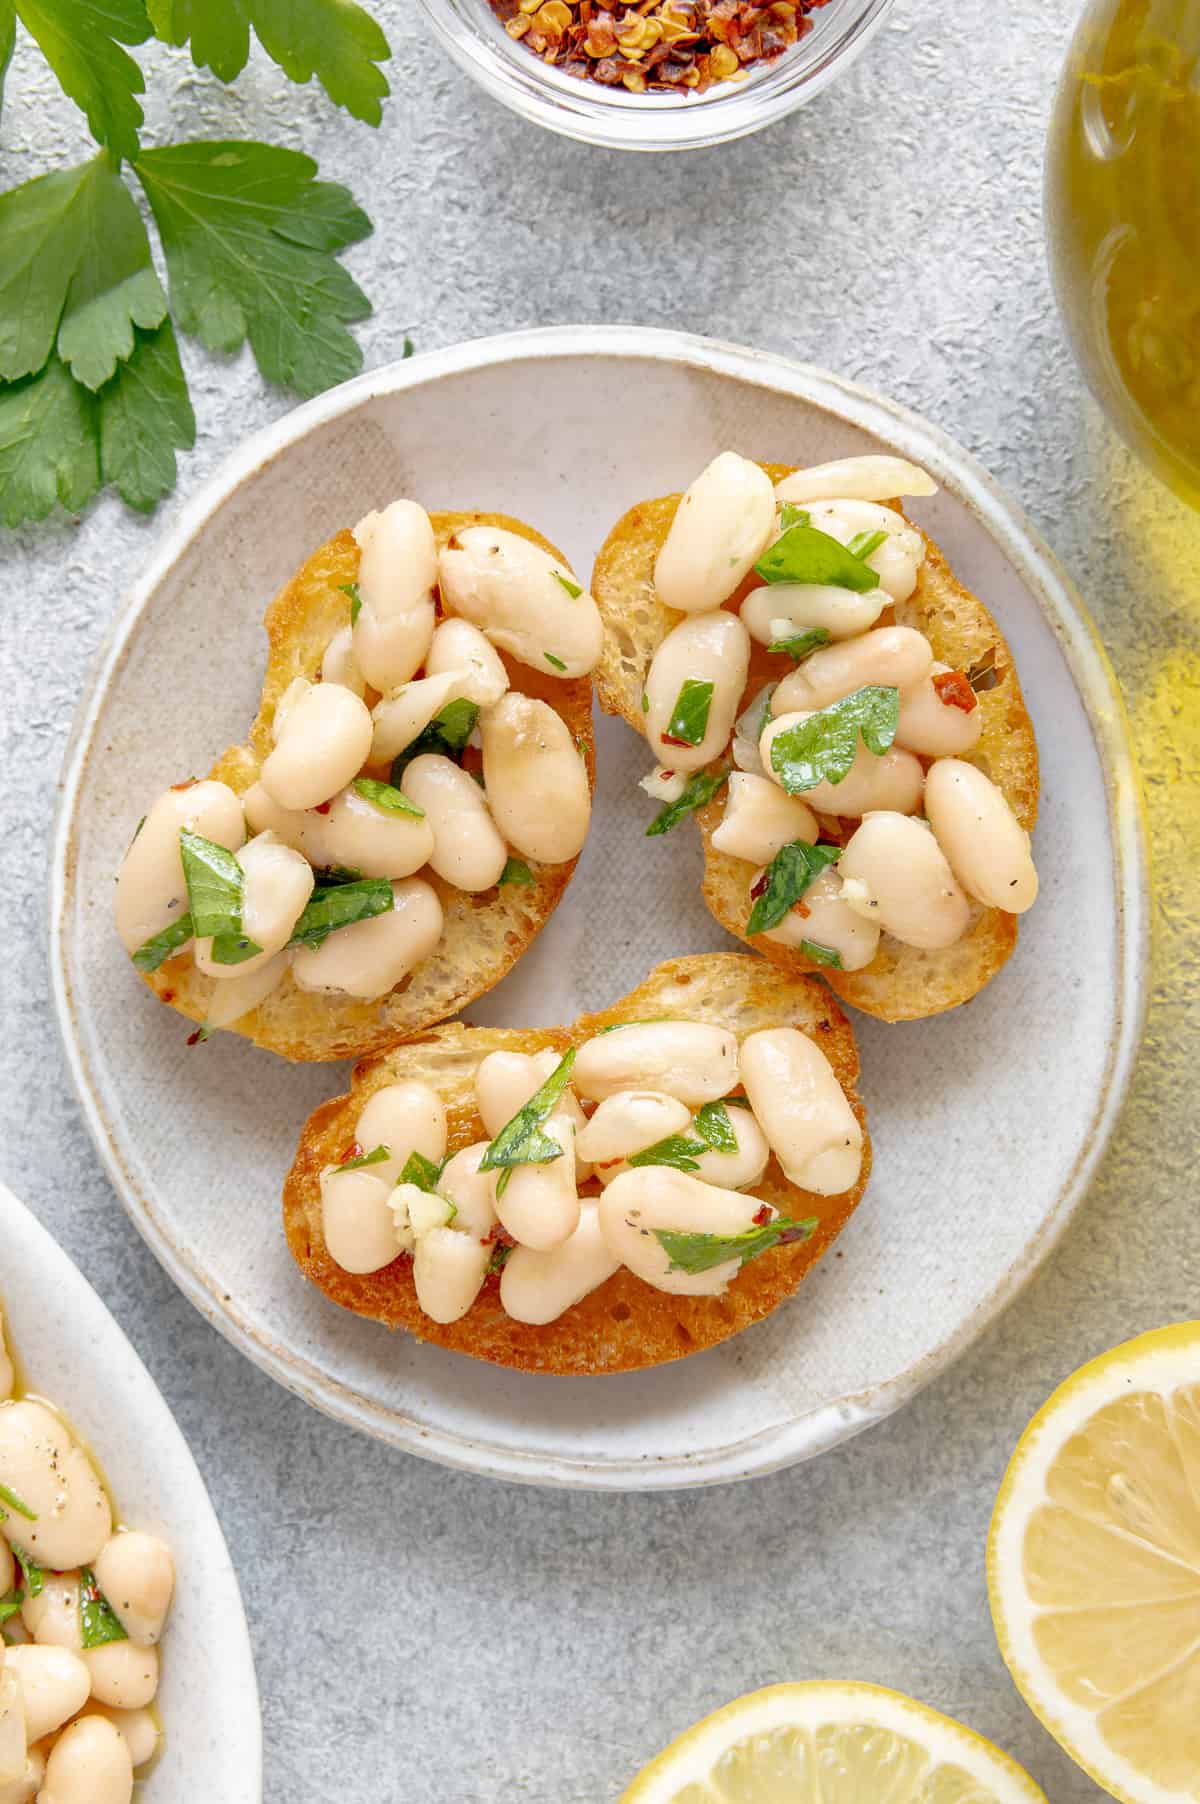 White bean dip spooned on crostinis on a plate.